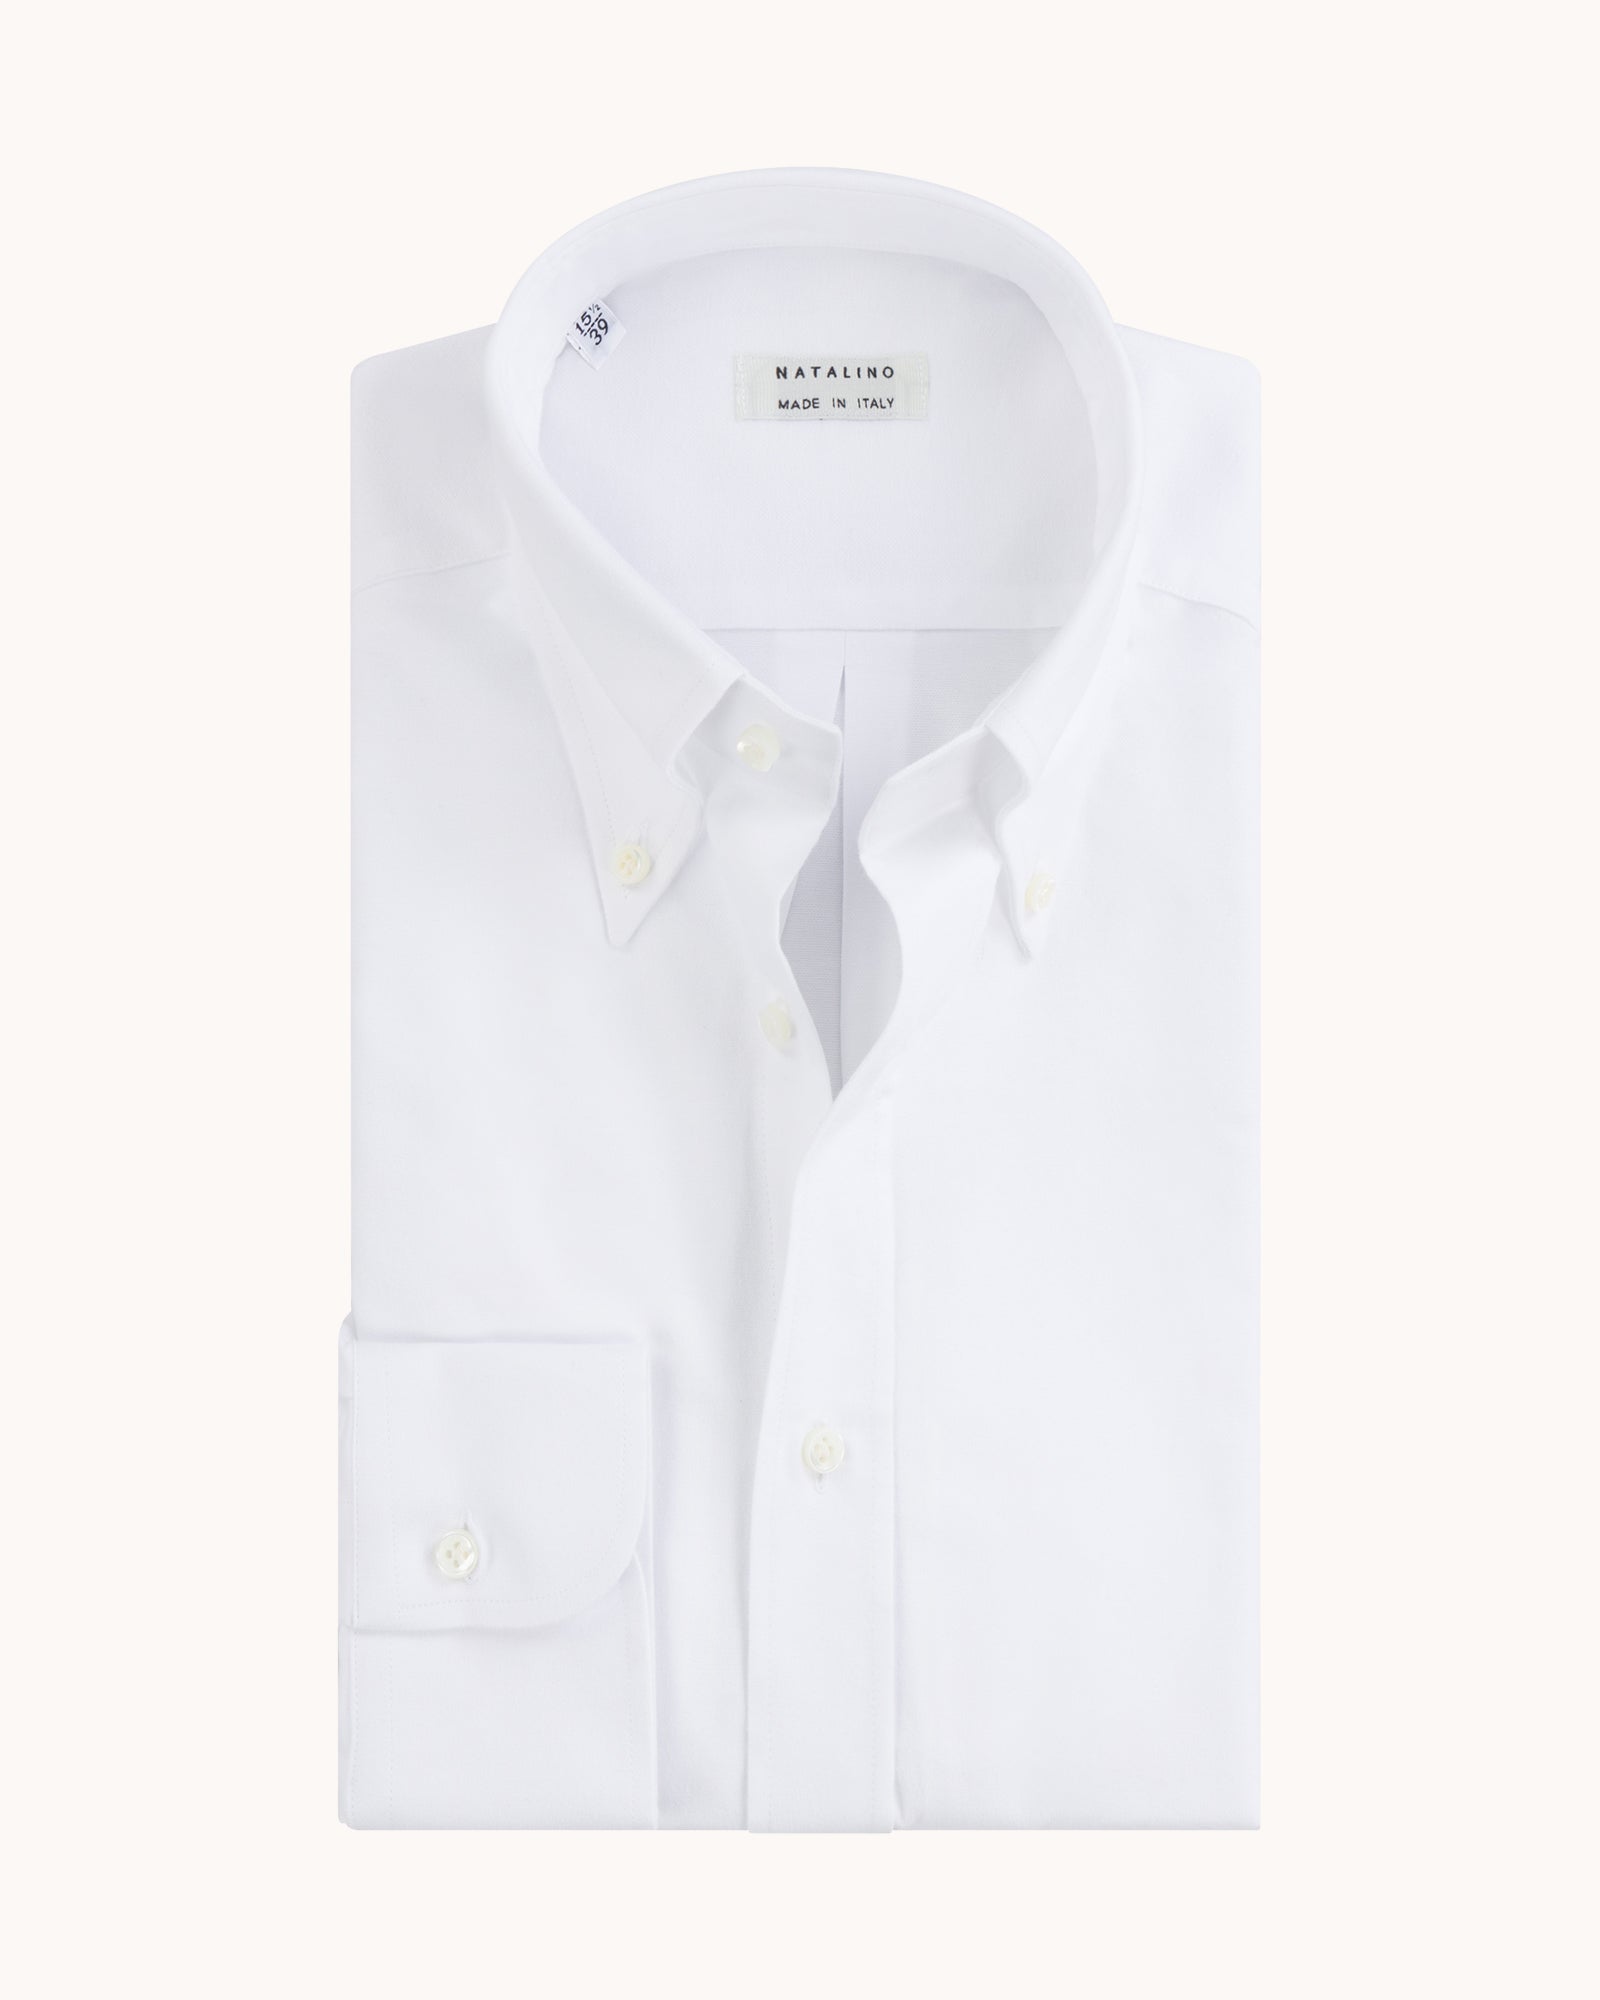 Button Down Collar Shirt - White Brushed Oxford Cotton